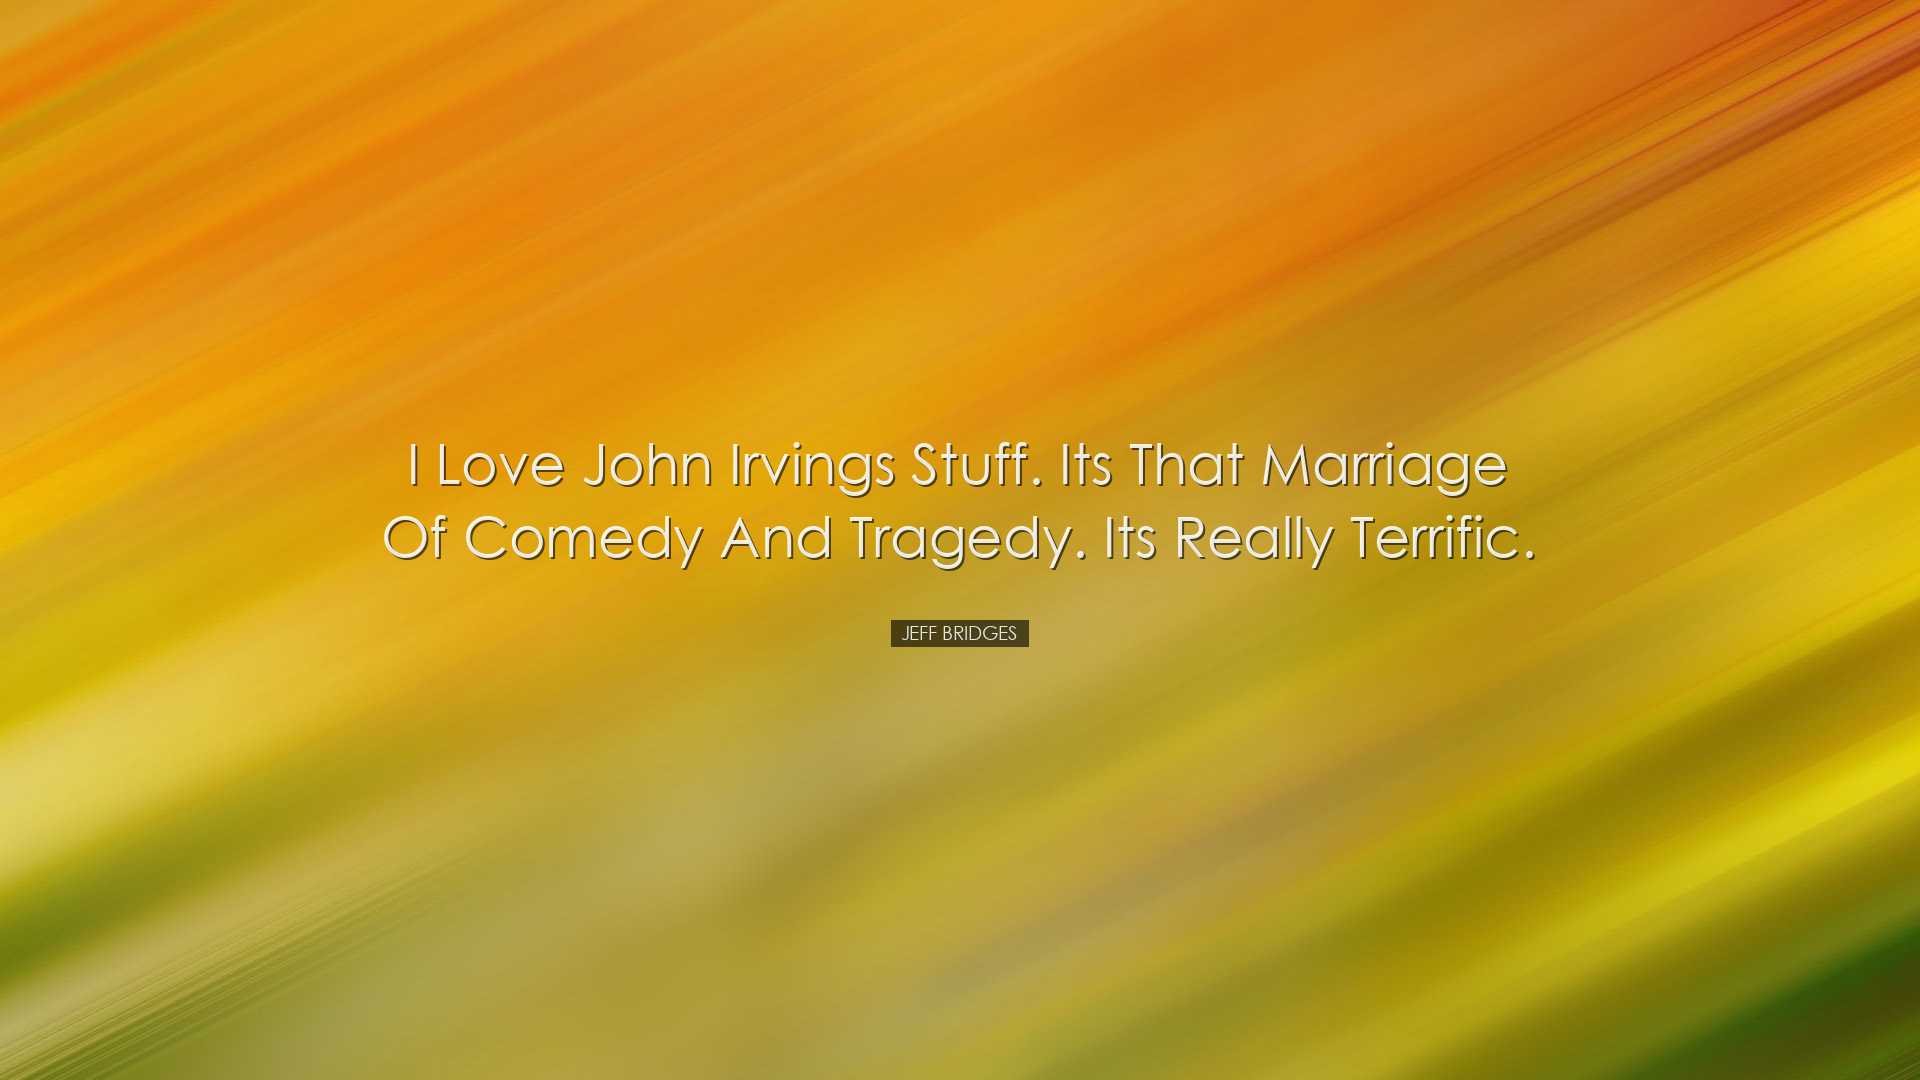 I love John Irvings stuff. Its that marriage of comedy and tragedy